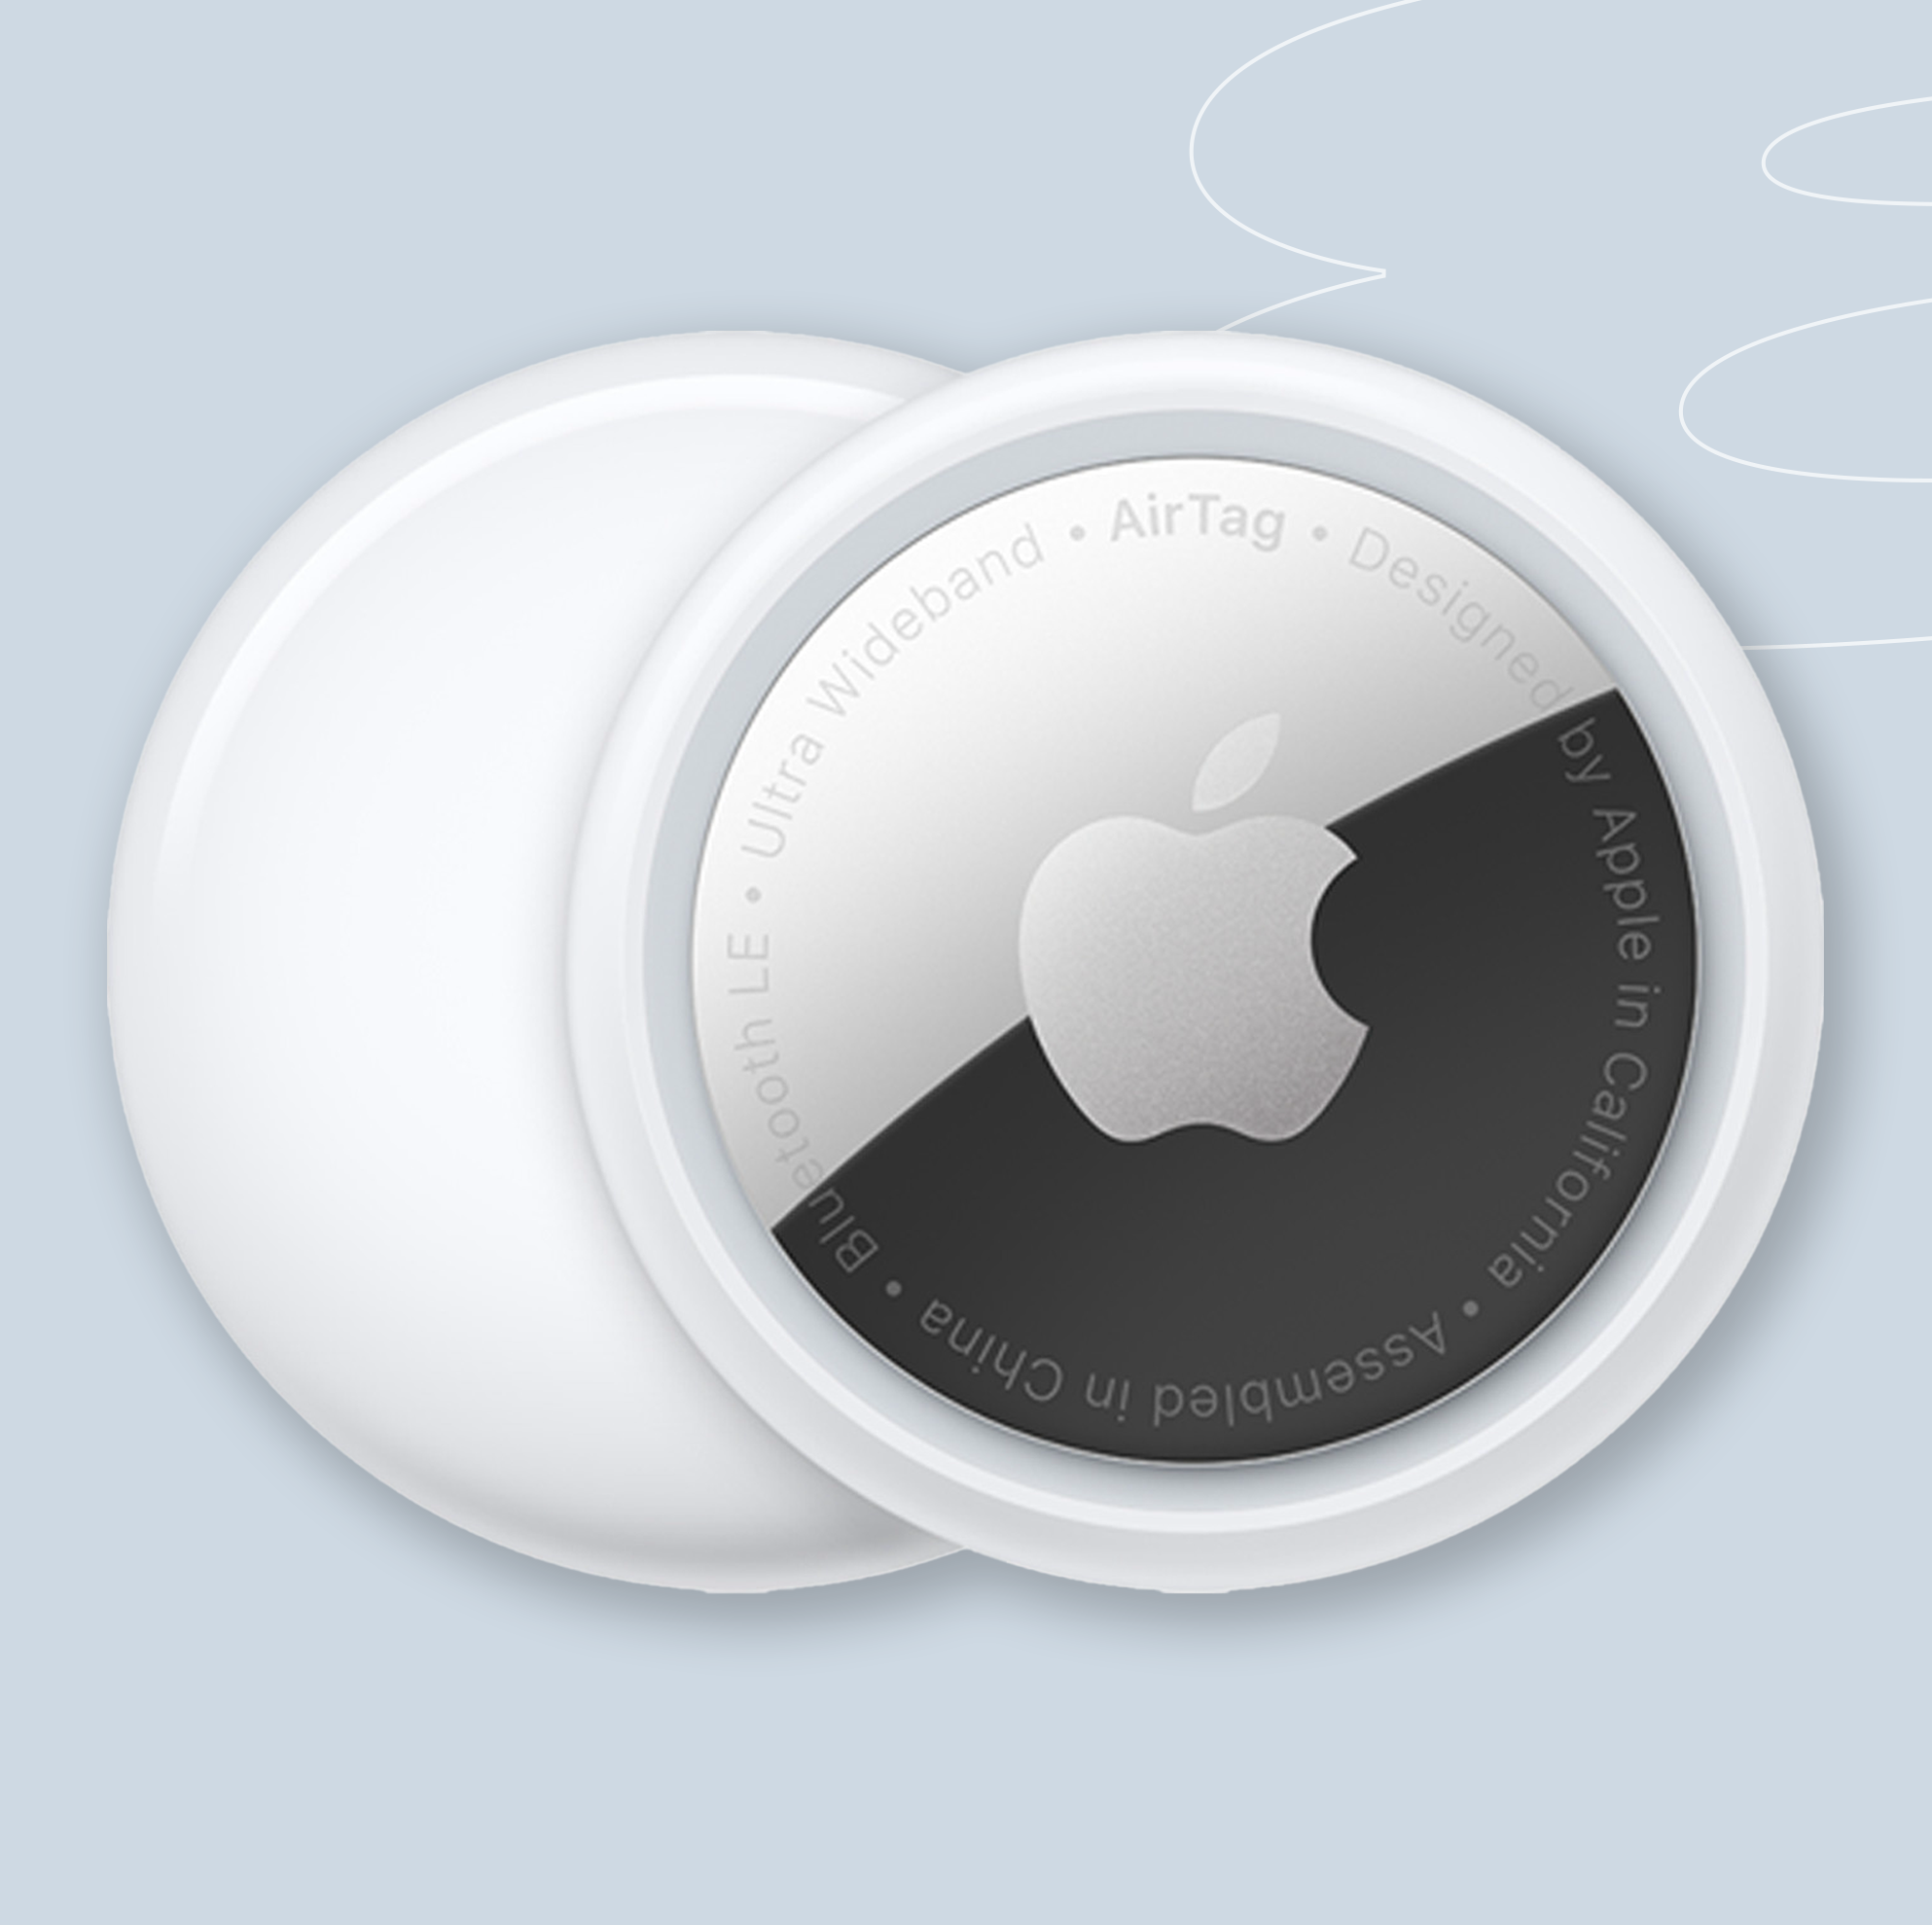 Before You Take Off This Summer, Get Some Apple AirTags for 20% Off